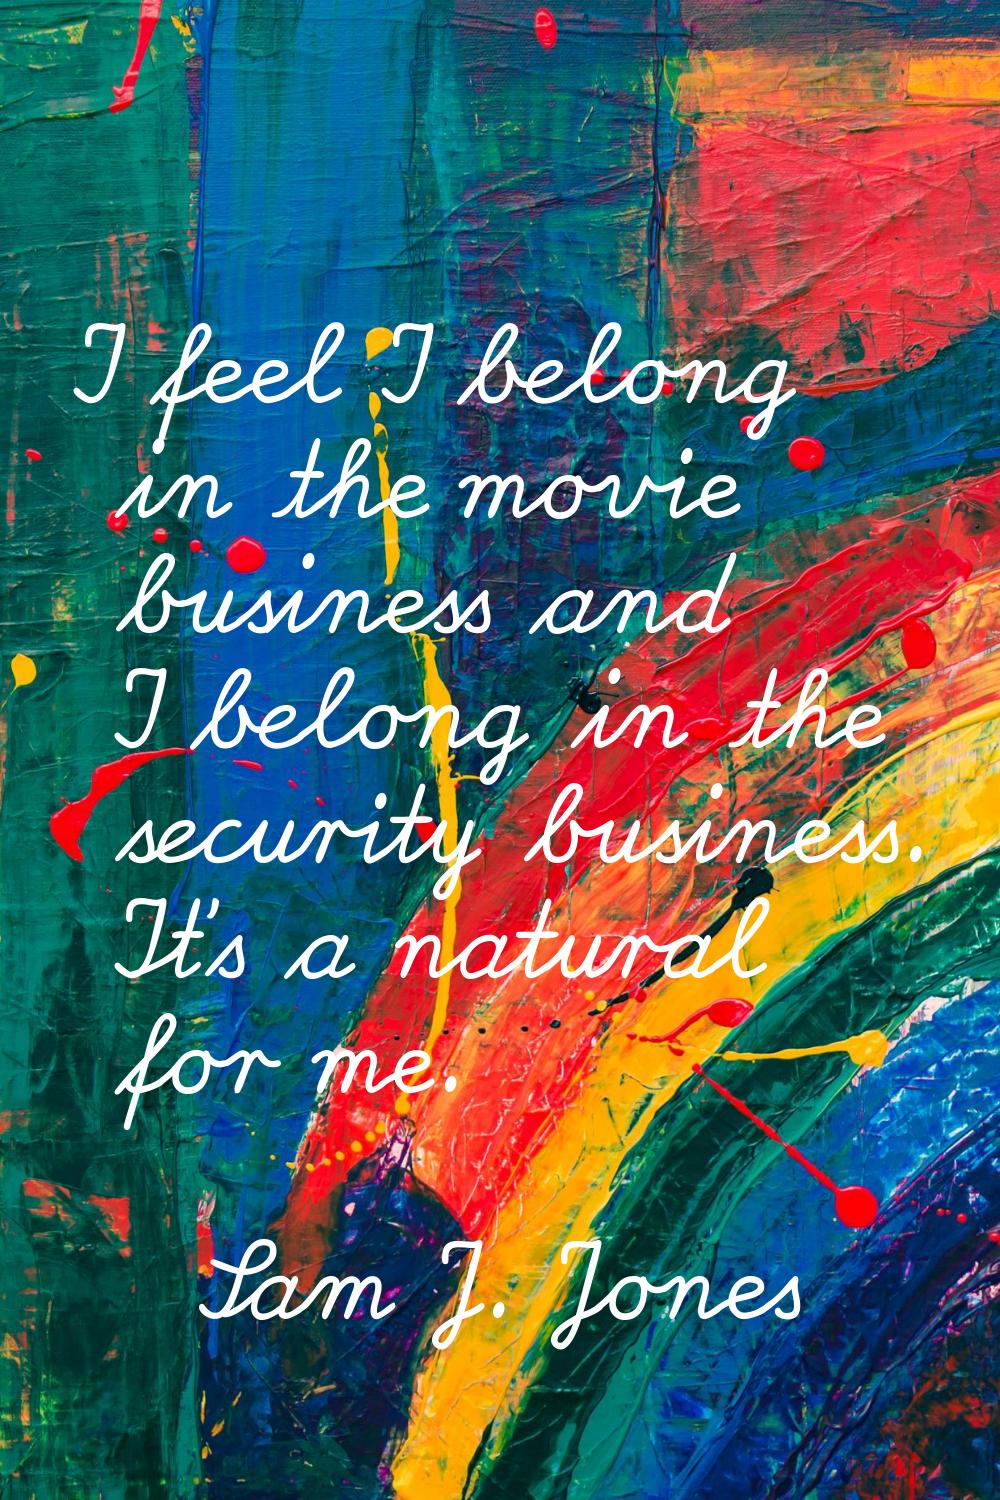 I feel I belong in the movie business and I belong in the security business. It's a natural for me.